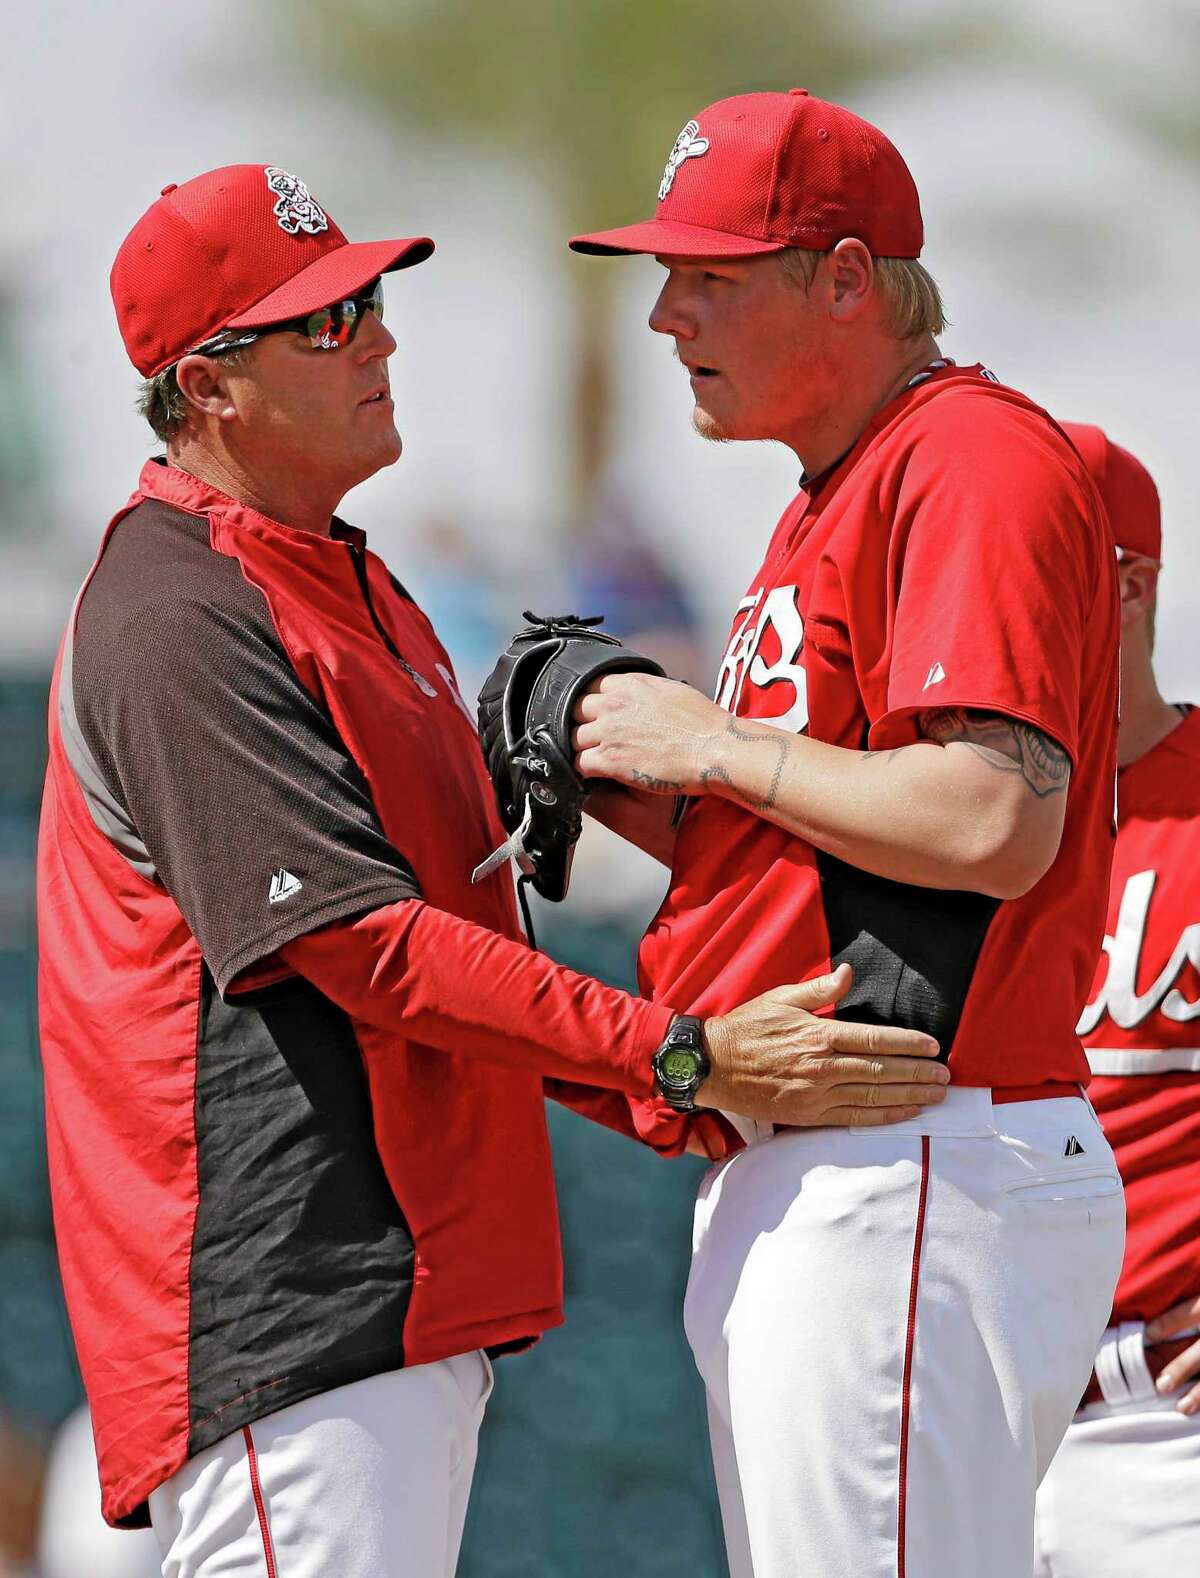 In this March 28 file photo, Cincinnati Reds pitching coach Bryan Price, left, talks to starter Mat Latos in the third inning of a spring training game against the Kansas City Royals in Goodyear, Ariz. The Reds have chosen Price to replace Dusty Baker as their next manager.